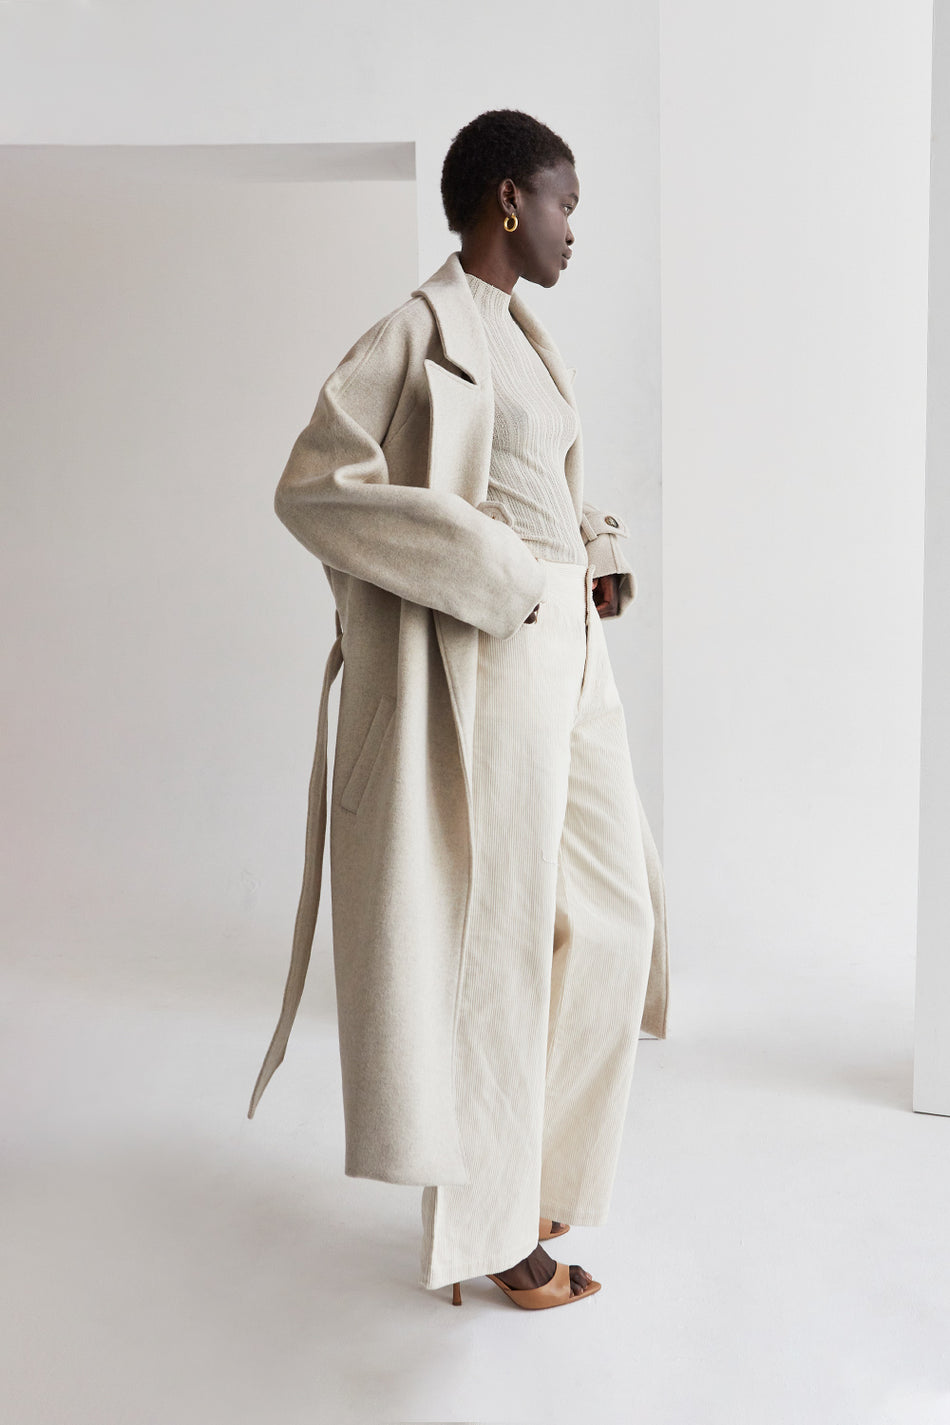 a model in a cream outfit with a beige wool coat